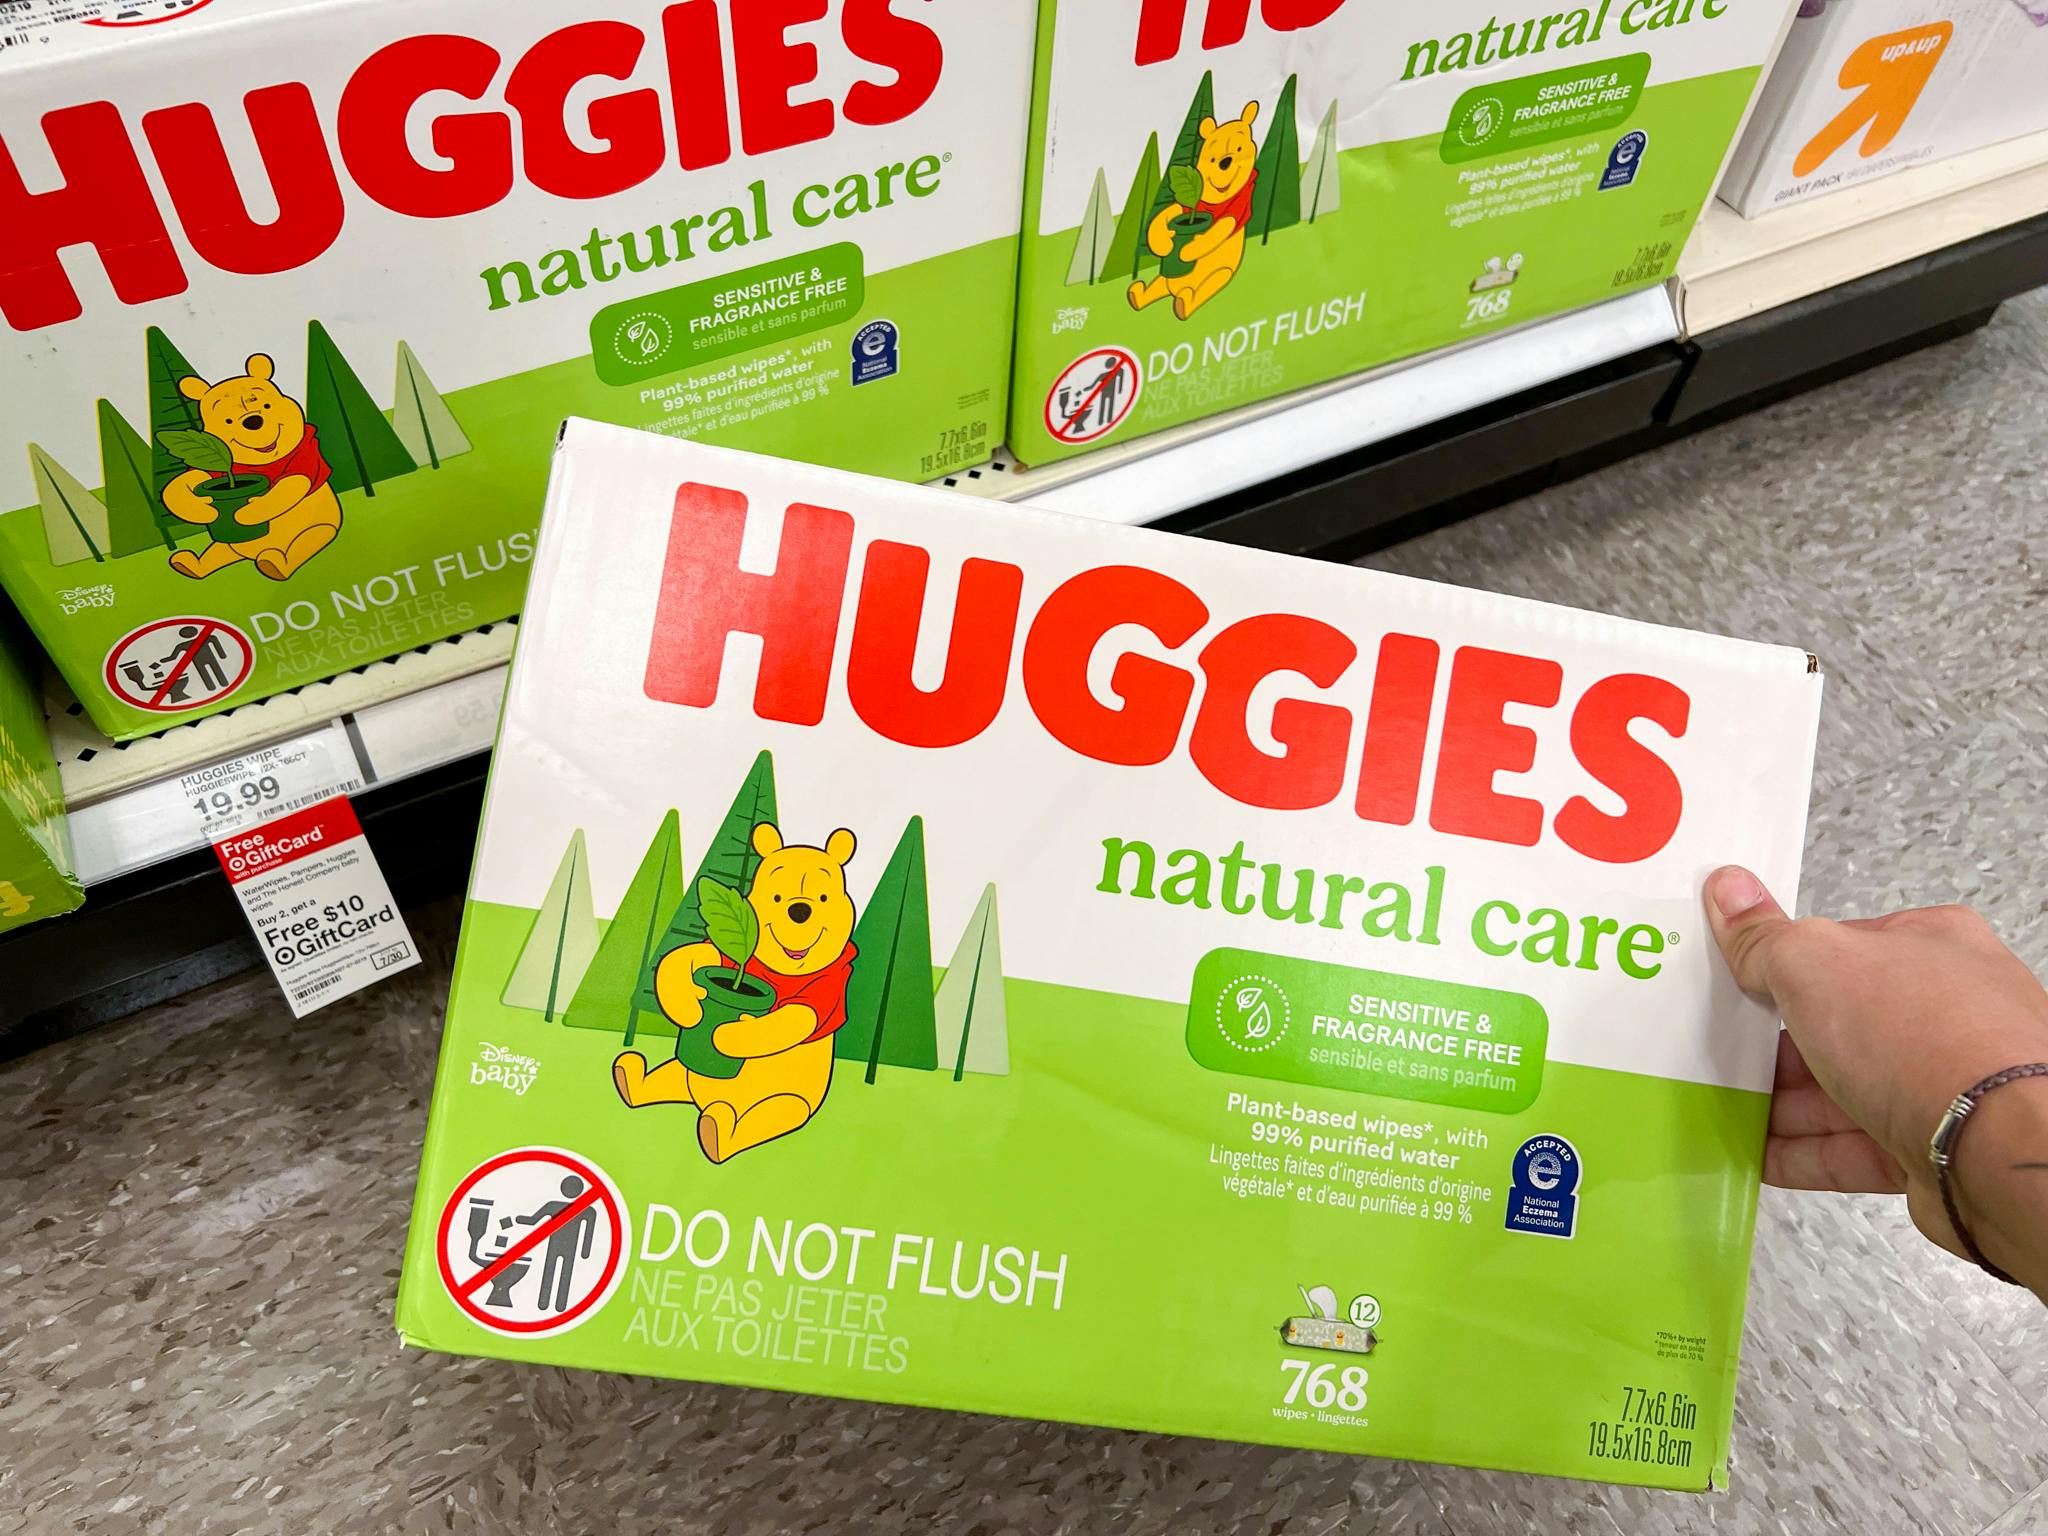 Huggies Natural Sensitive Care Fragrance Free Wipes featured on Target shelf